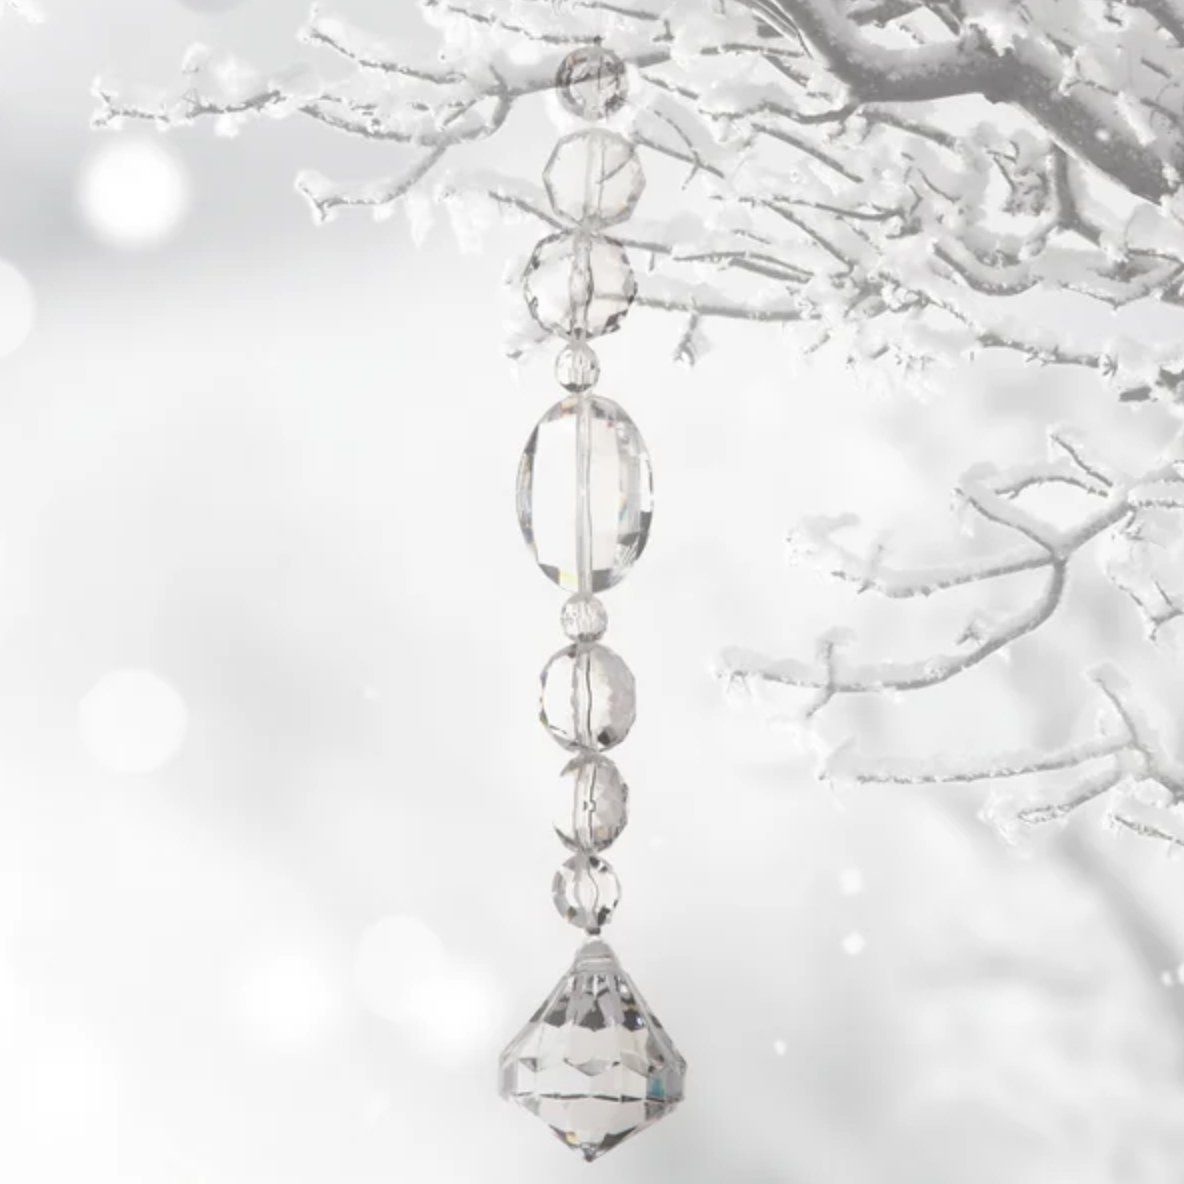 The clear crystal drops hang from a white snowy tree branch